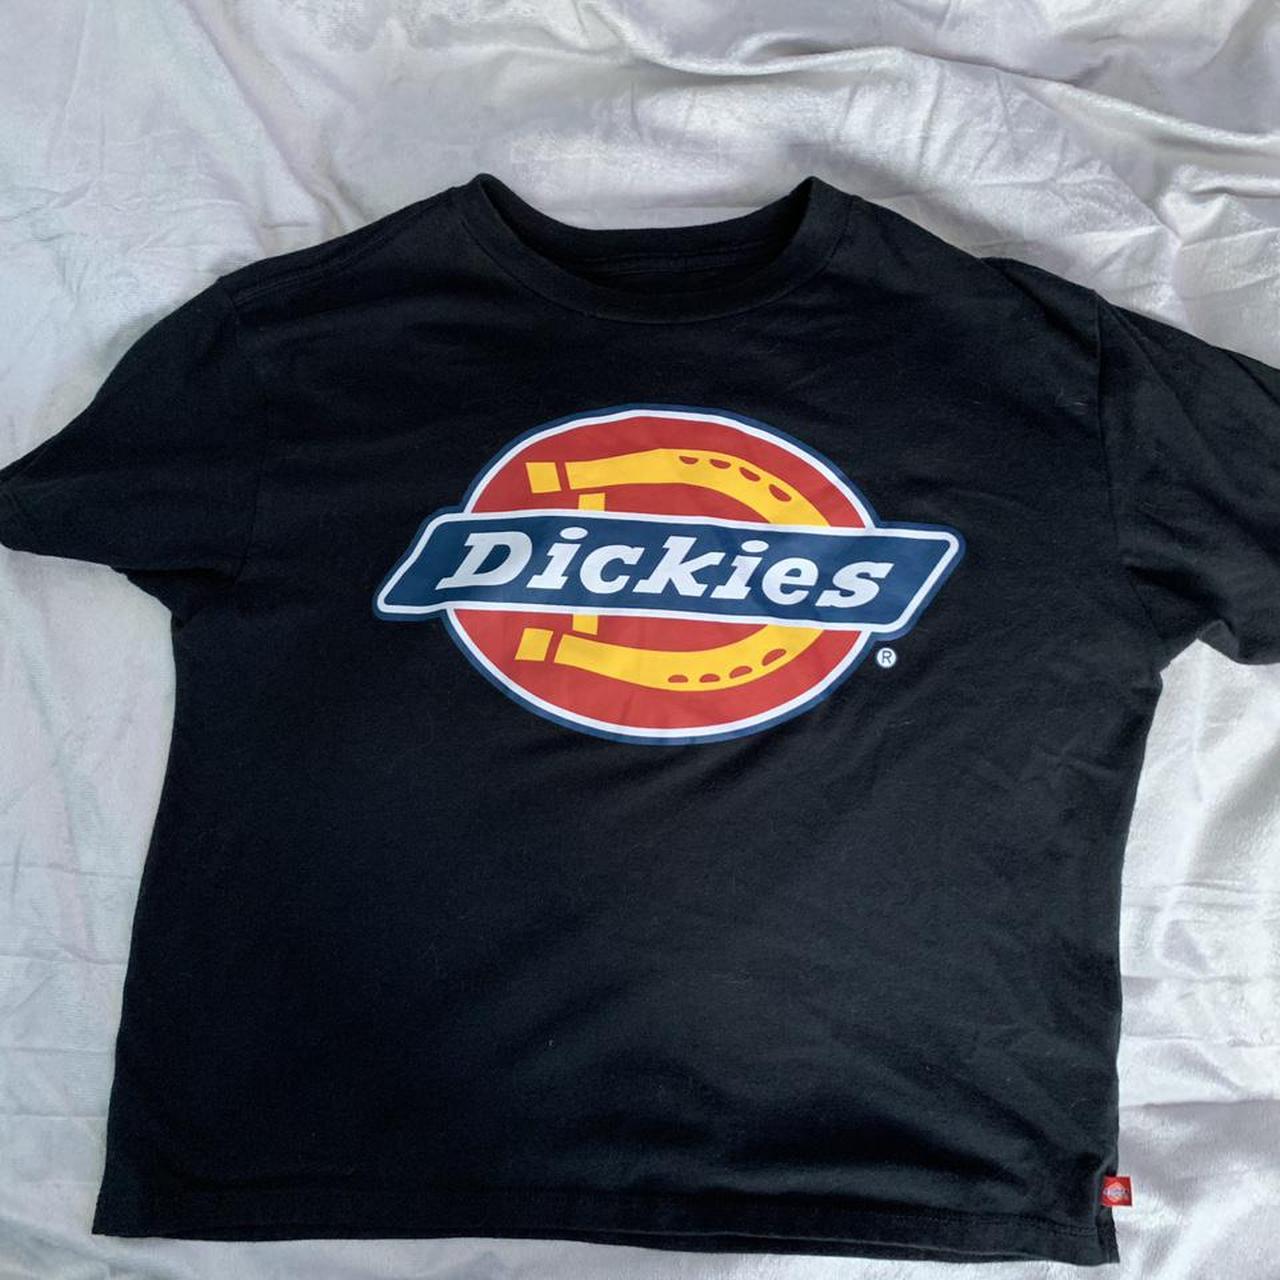 Dickies Women's Red and Black T-shirt